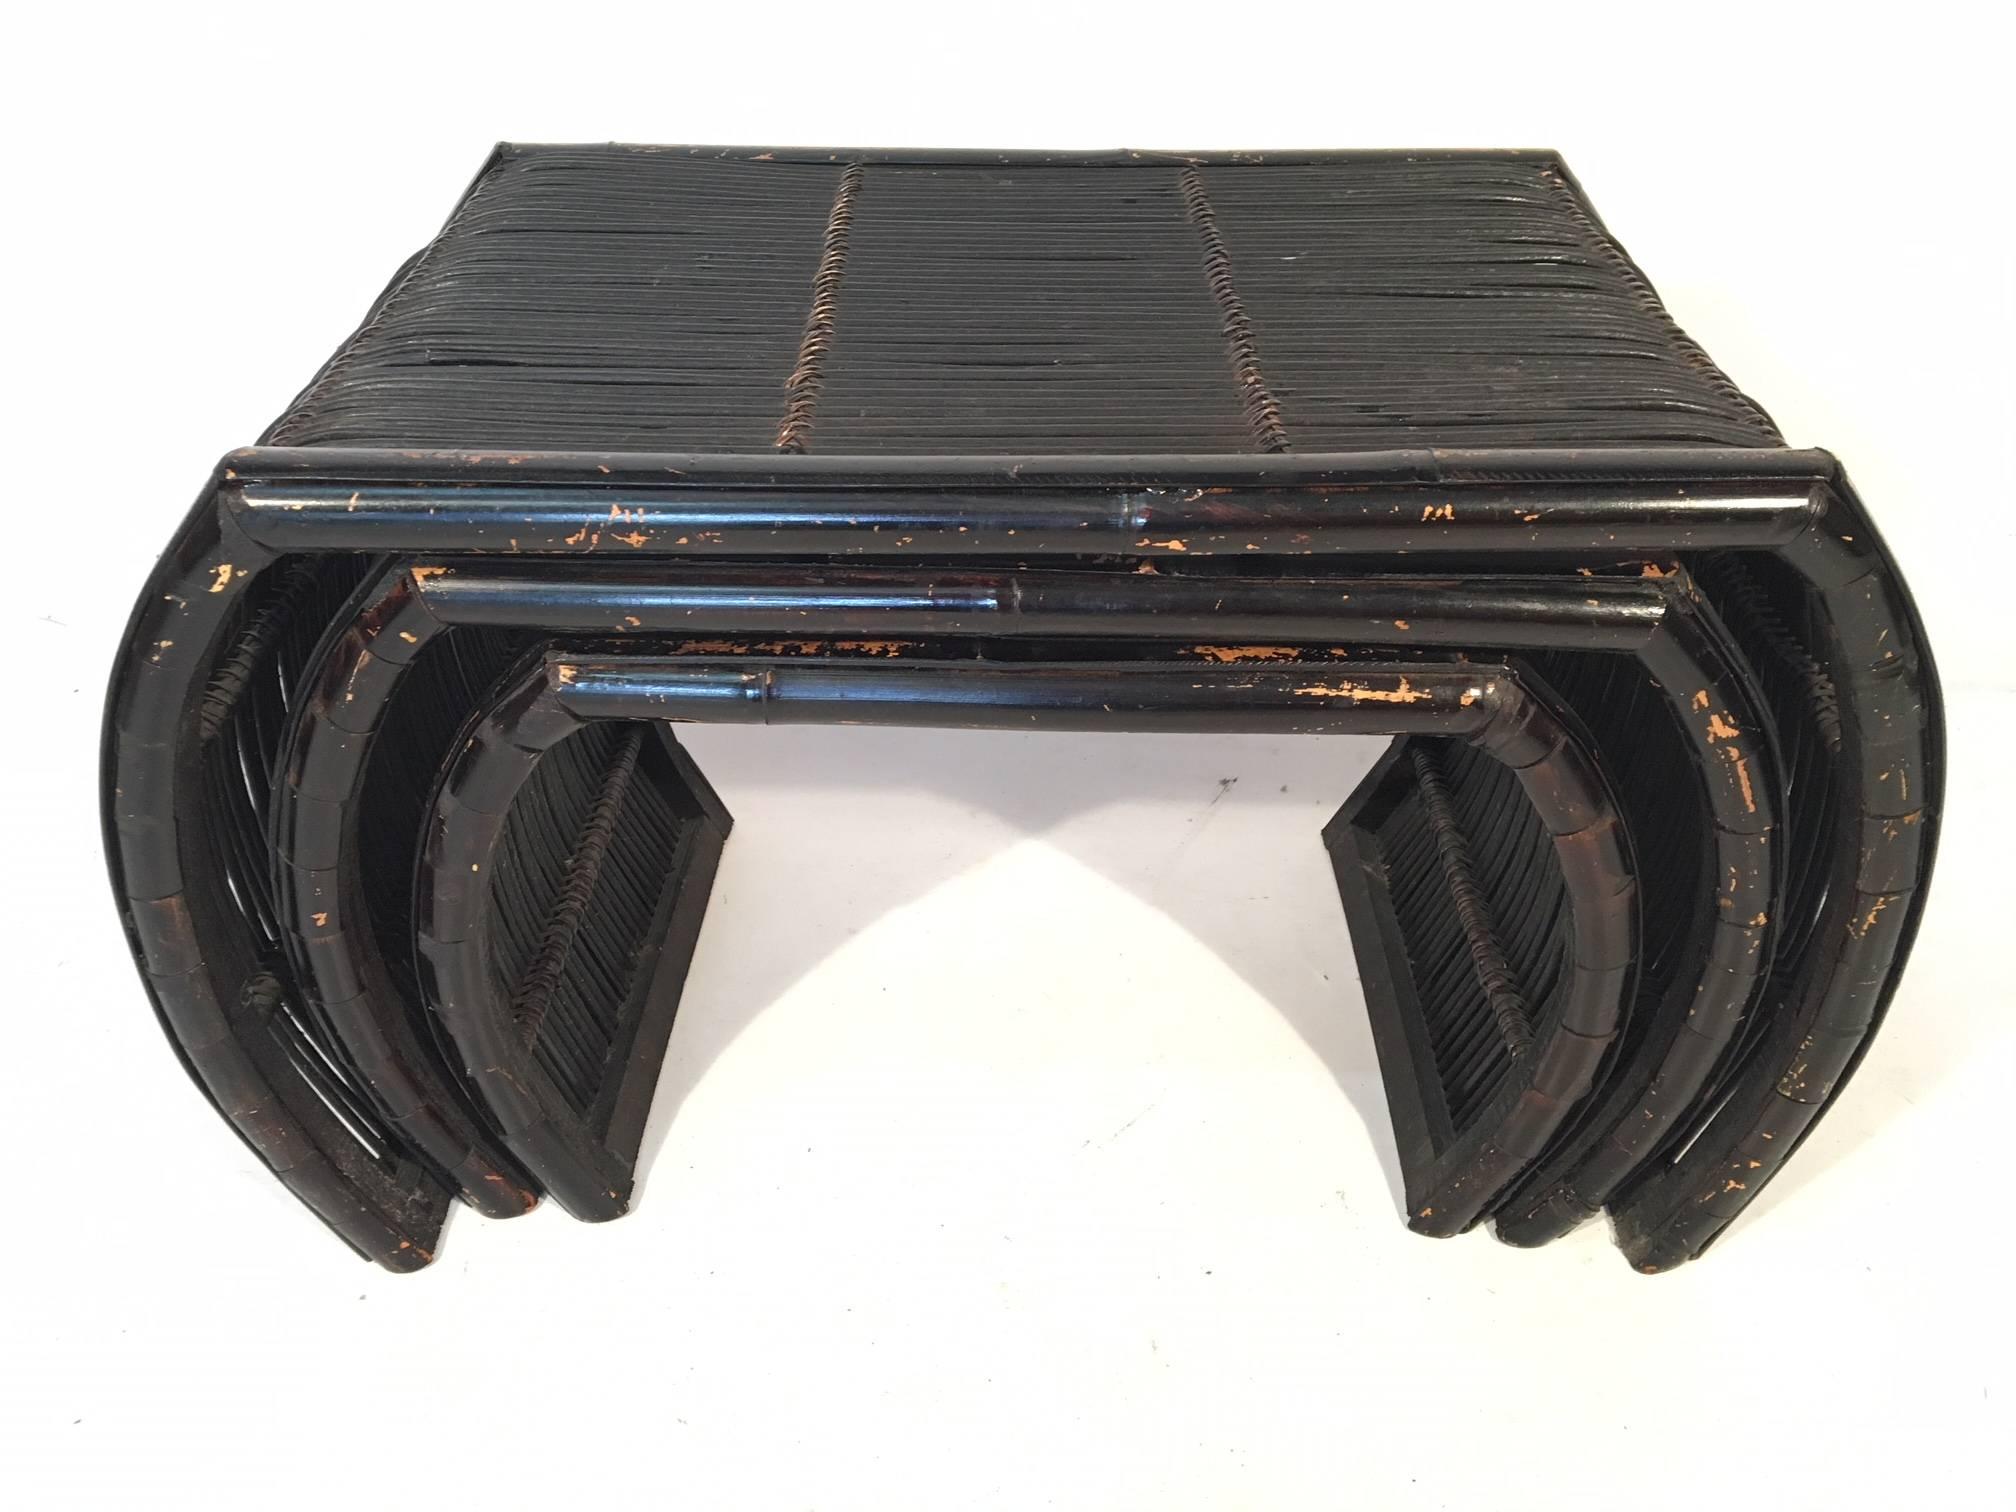 Set of three rattan nesting trays in vintage Chinese chinoiserie style. Ming legs and faux bamboo frame. Good vintage condition with abrasions to the gloss black finish.
Measurements:
Large tray: 25